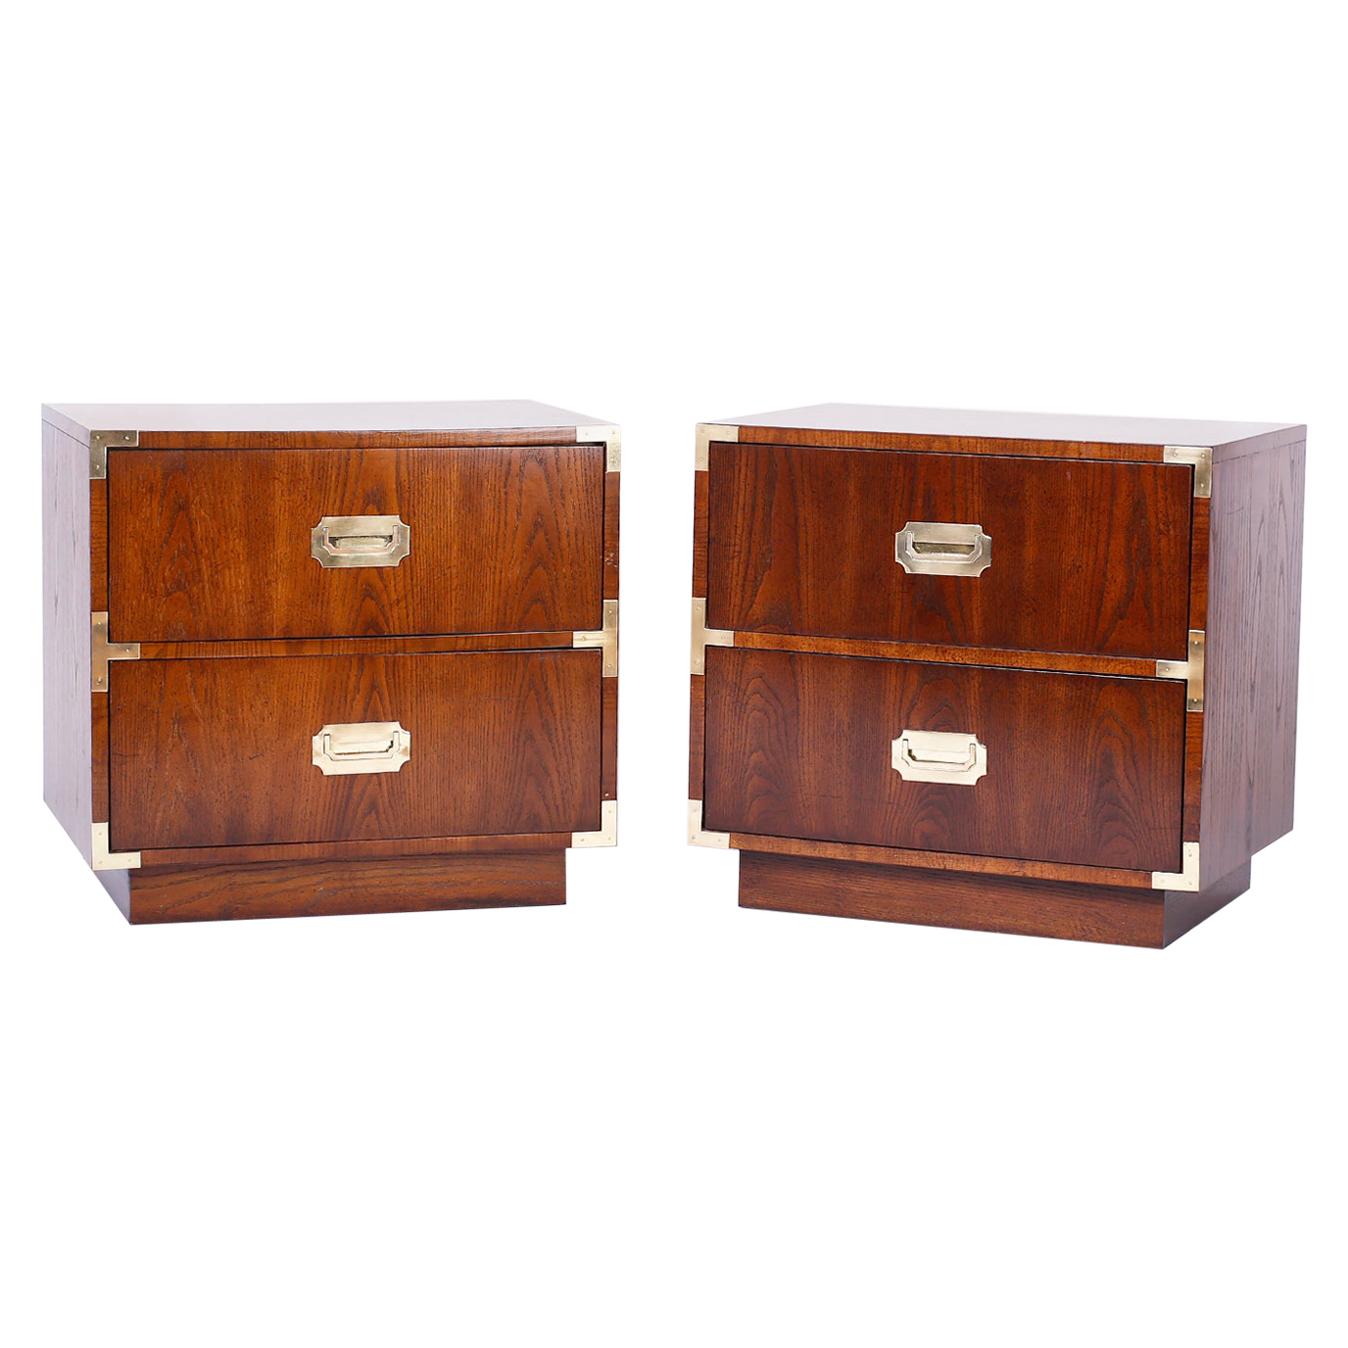 Pair of Campaign Style Nightstands